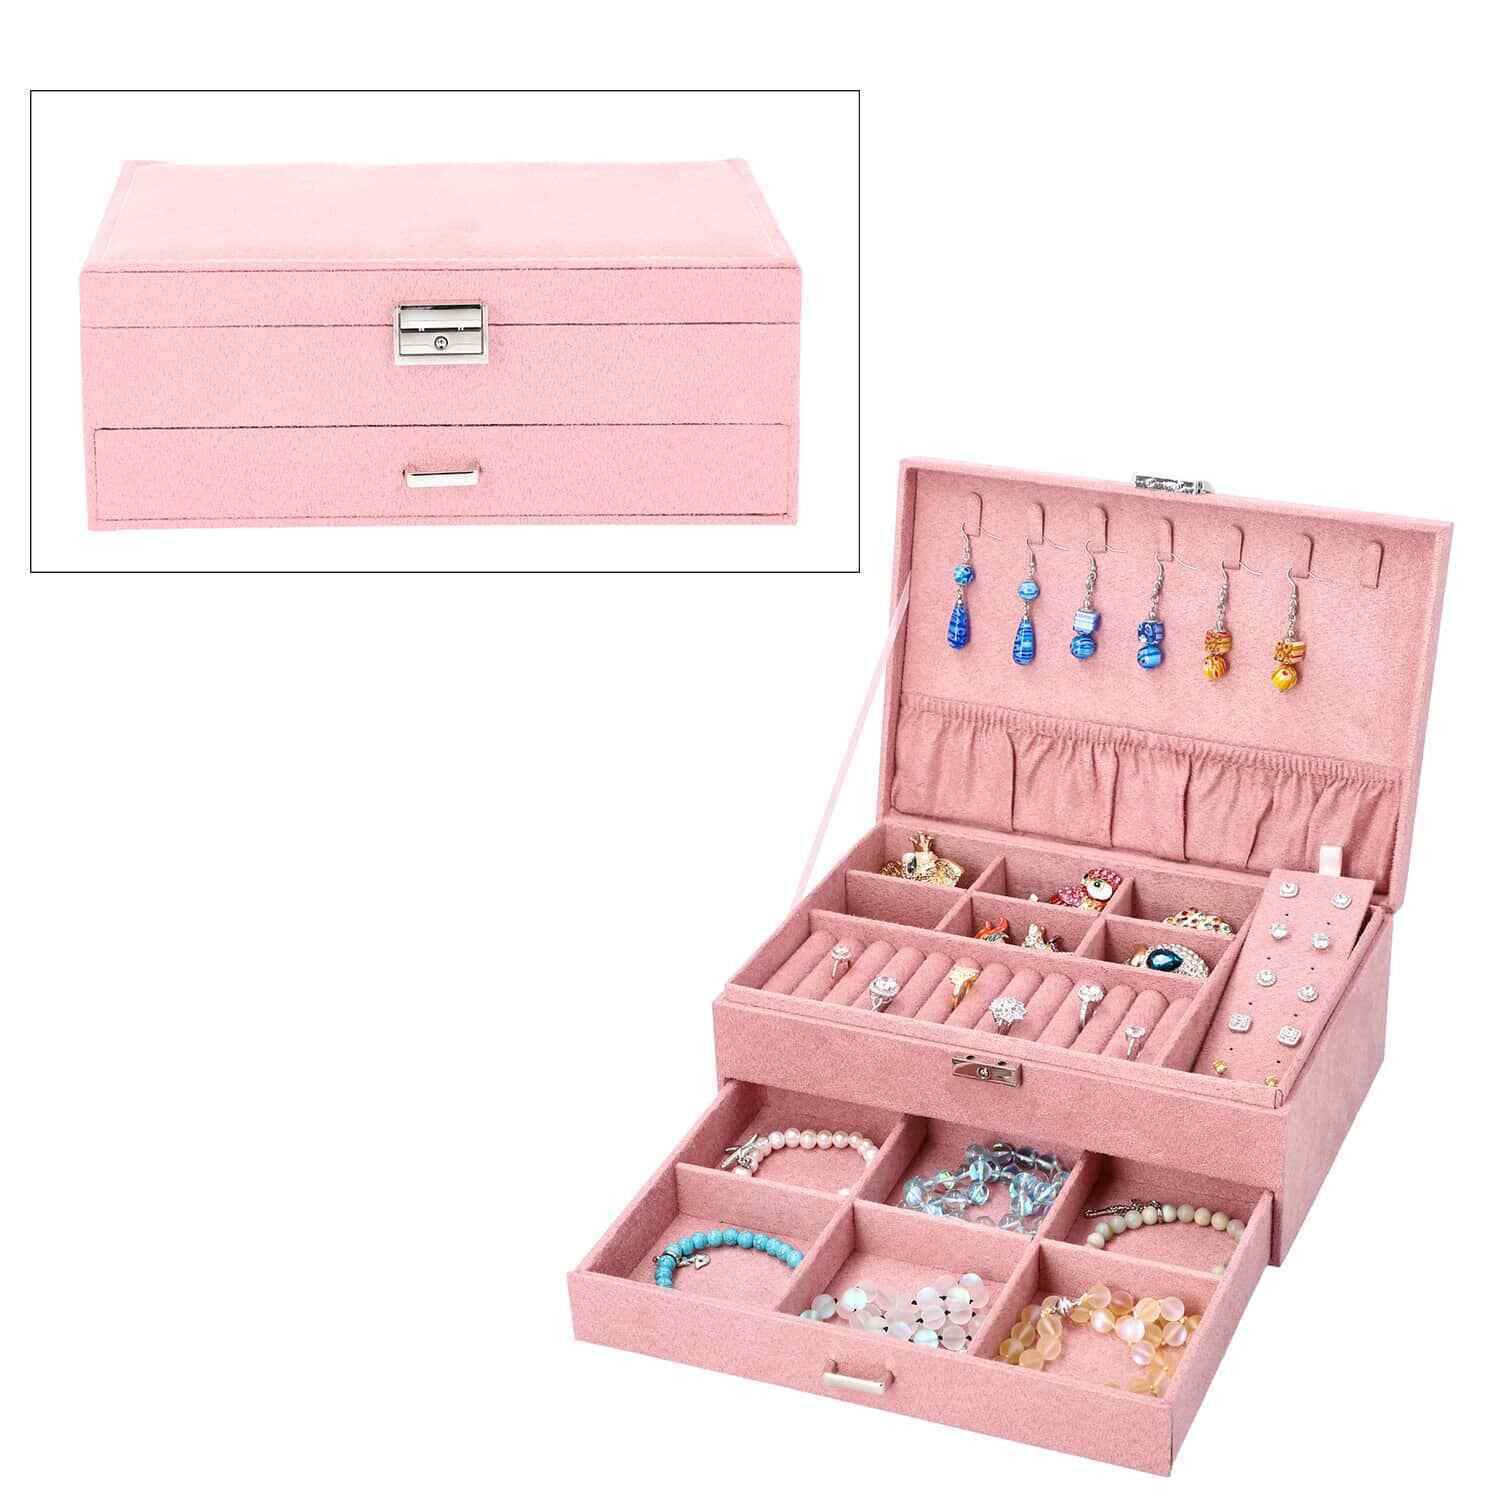 Jewelry Box Pink Velvet 2 Layer with Lock and Key Anti Tarnish Scratch Resistant